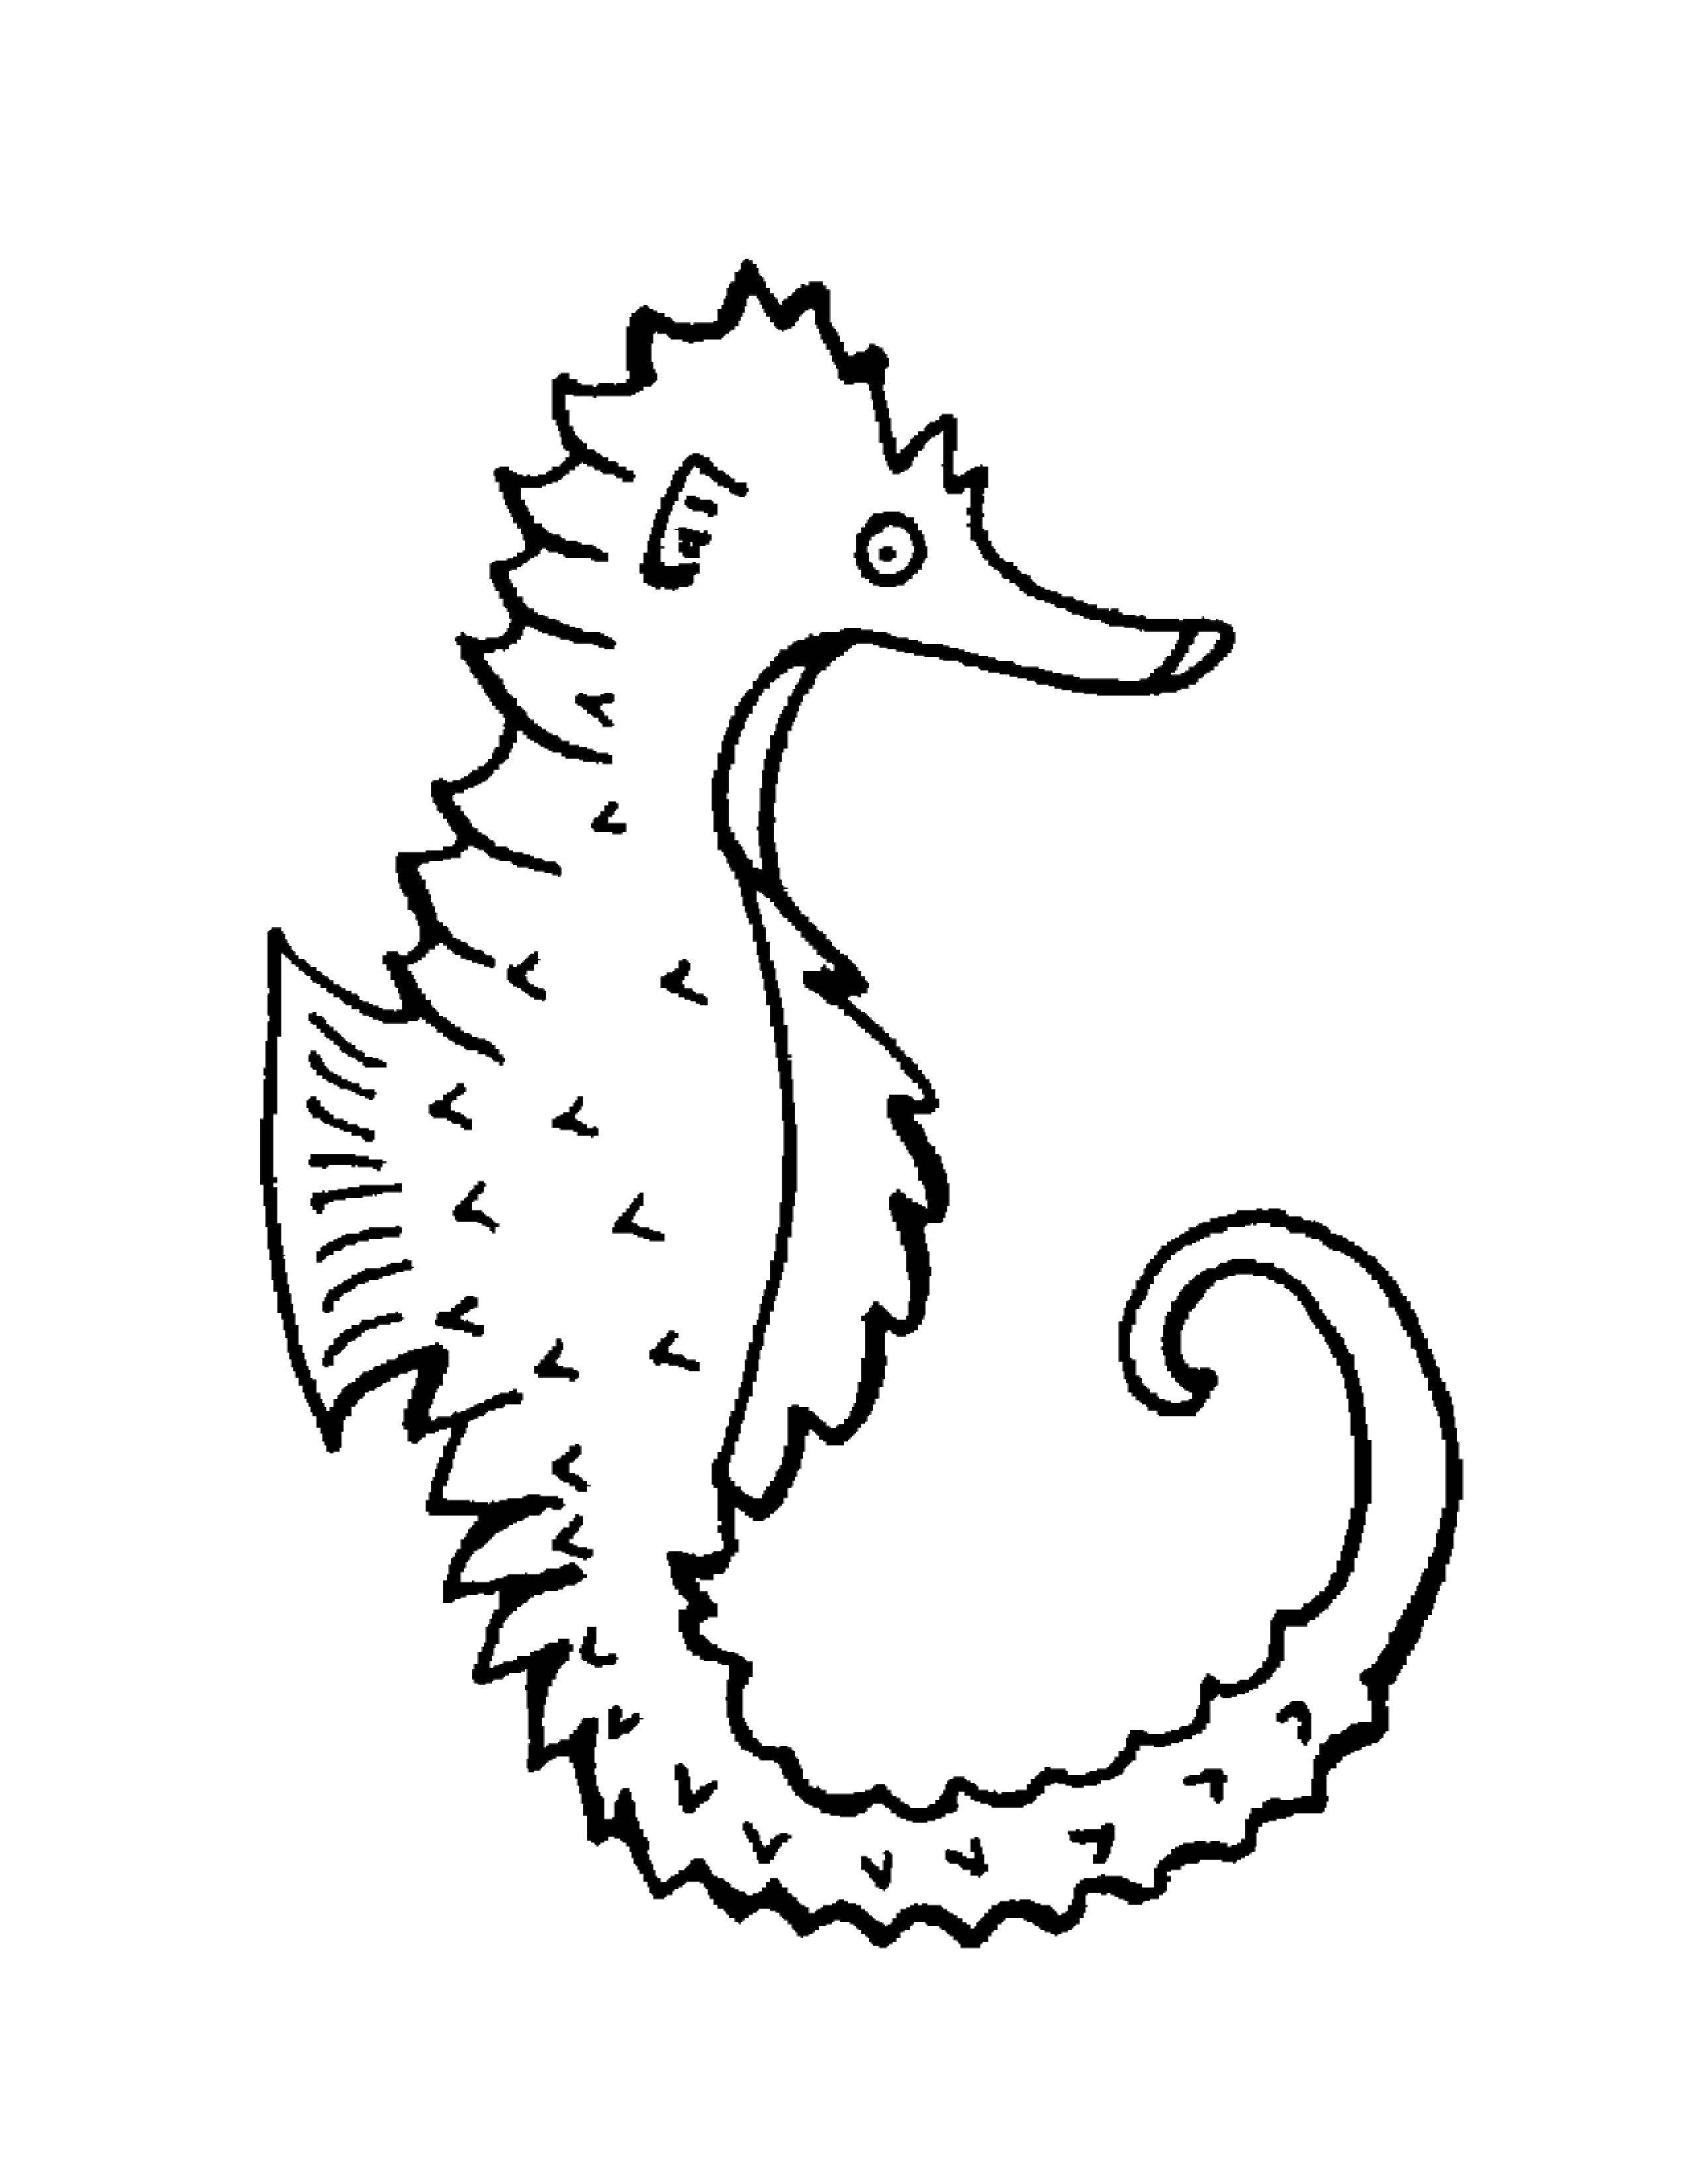 Coloring Seahorse. Category marine. Tags:  Underwater world, seahorses.